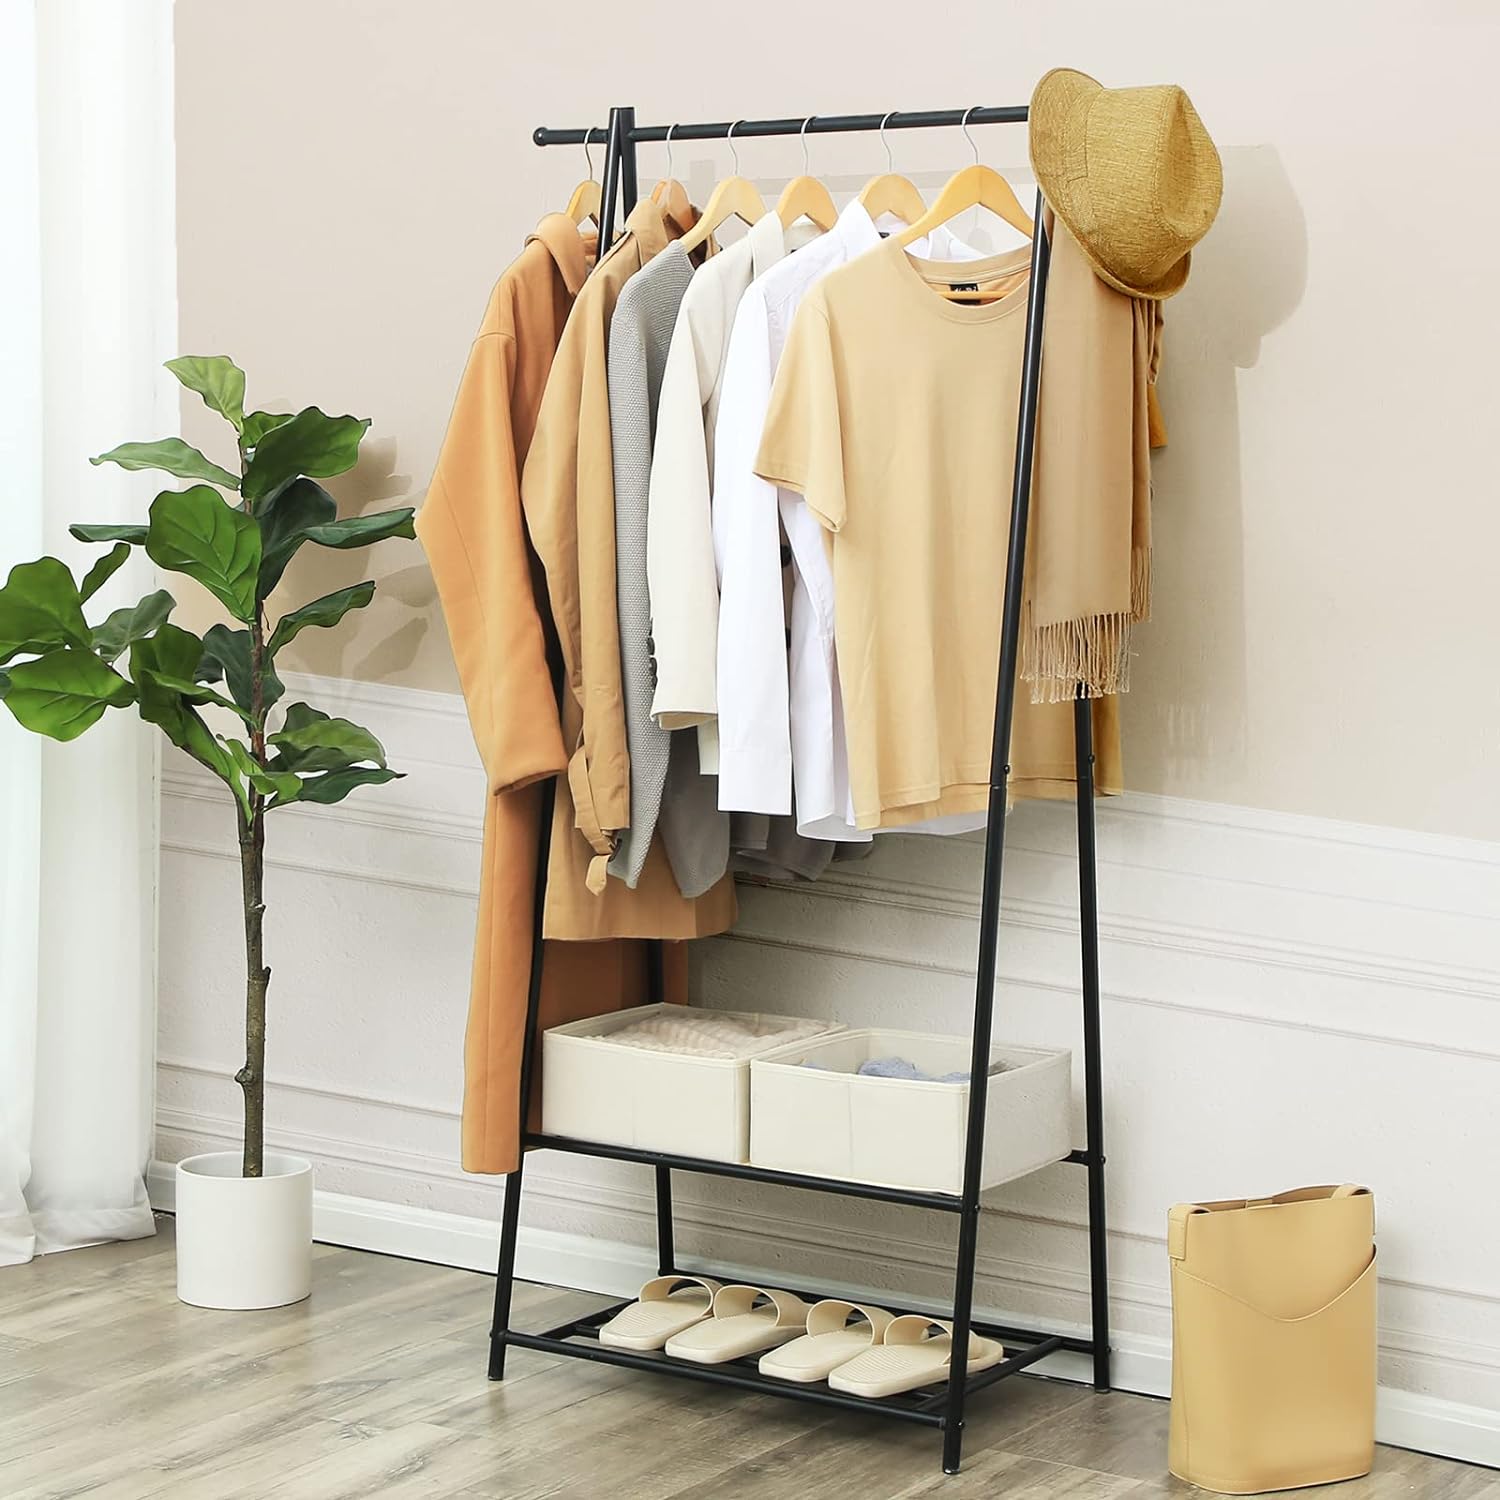 Clothes Rail, Coat Stand, Coat Rack with Shoe Storage, Industrial Clothes Rail, SONGMICS